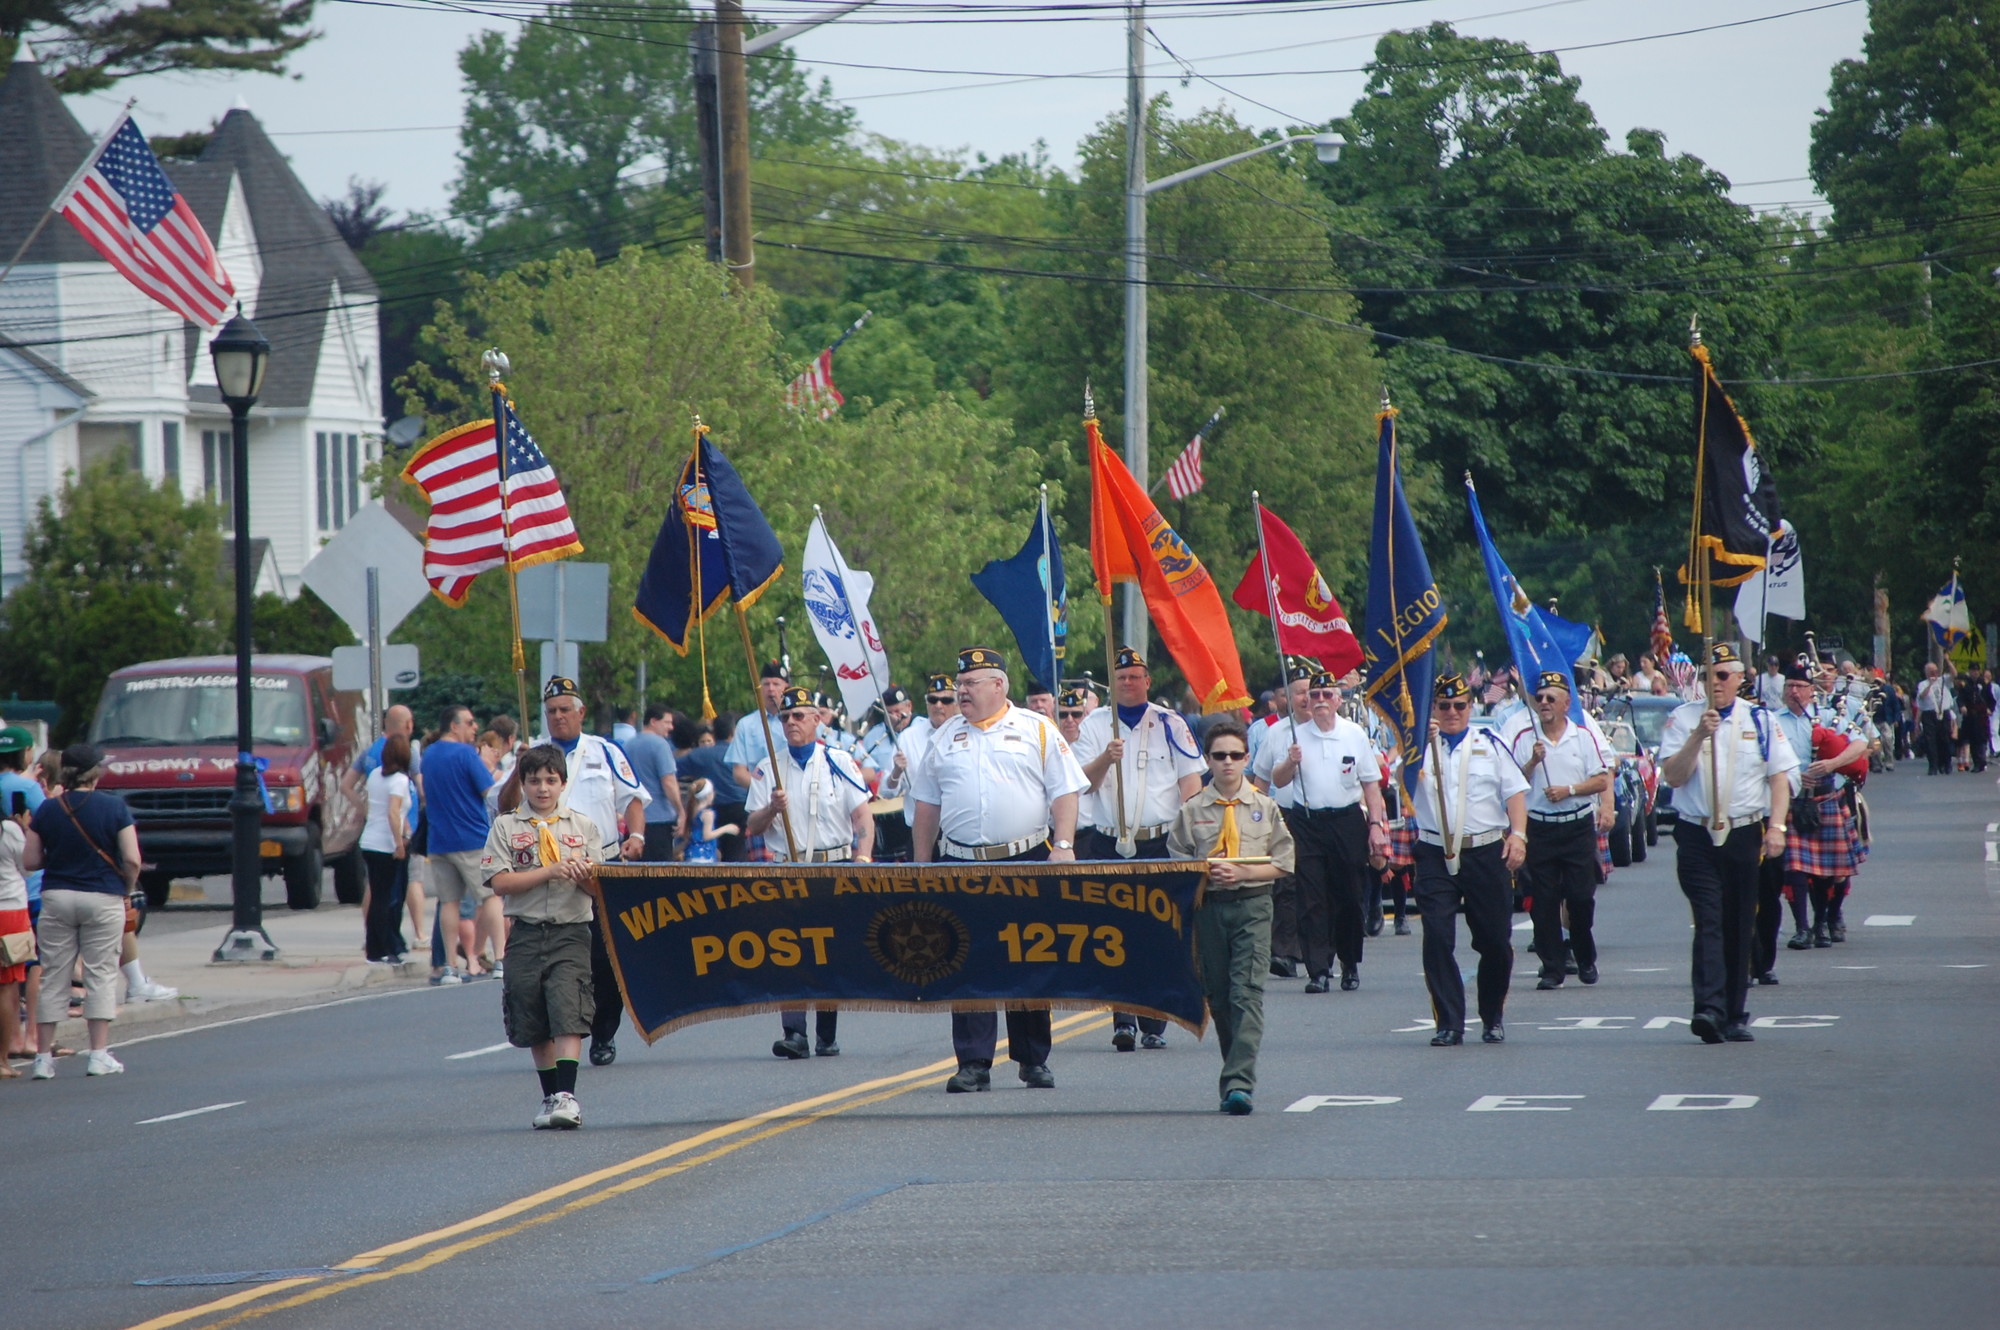 Wantagh American Legion Post 1273 will lead this year’s Memorial Day parade, which starts at 10 a.m. on Monday.